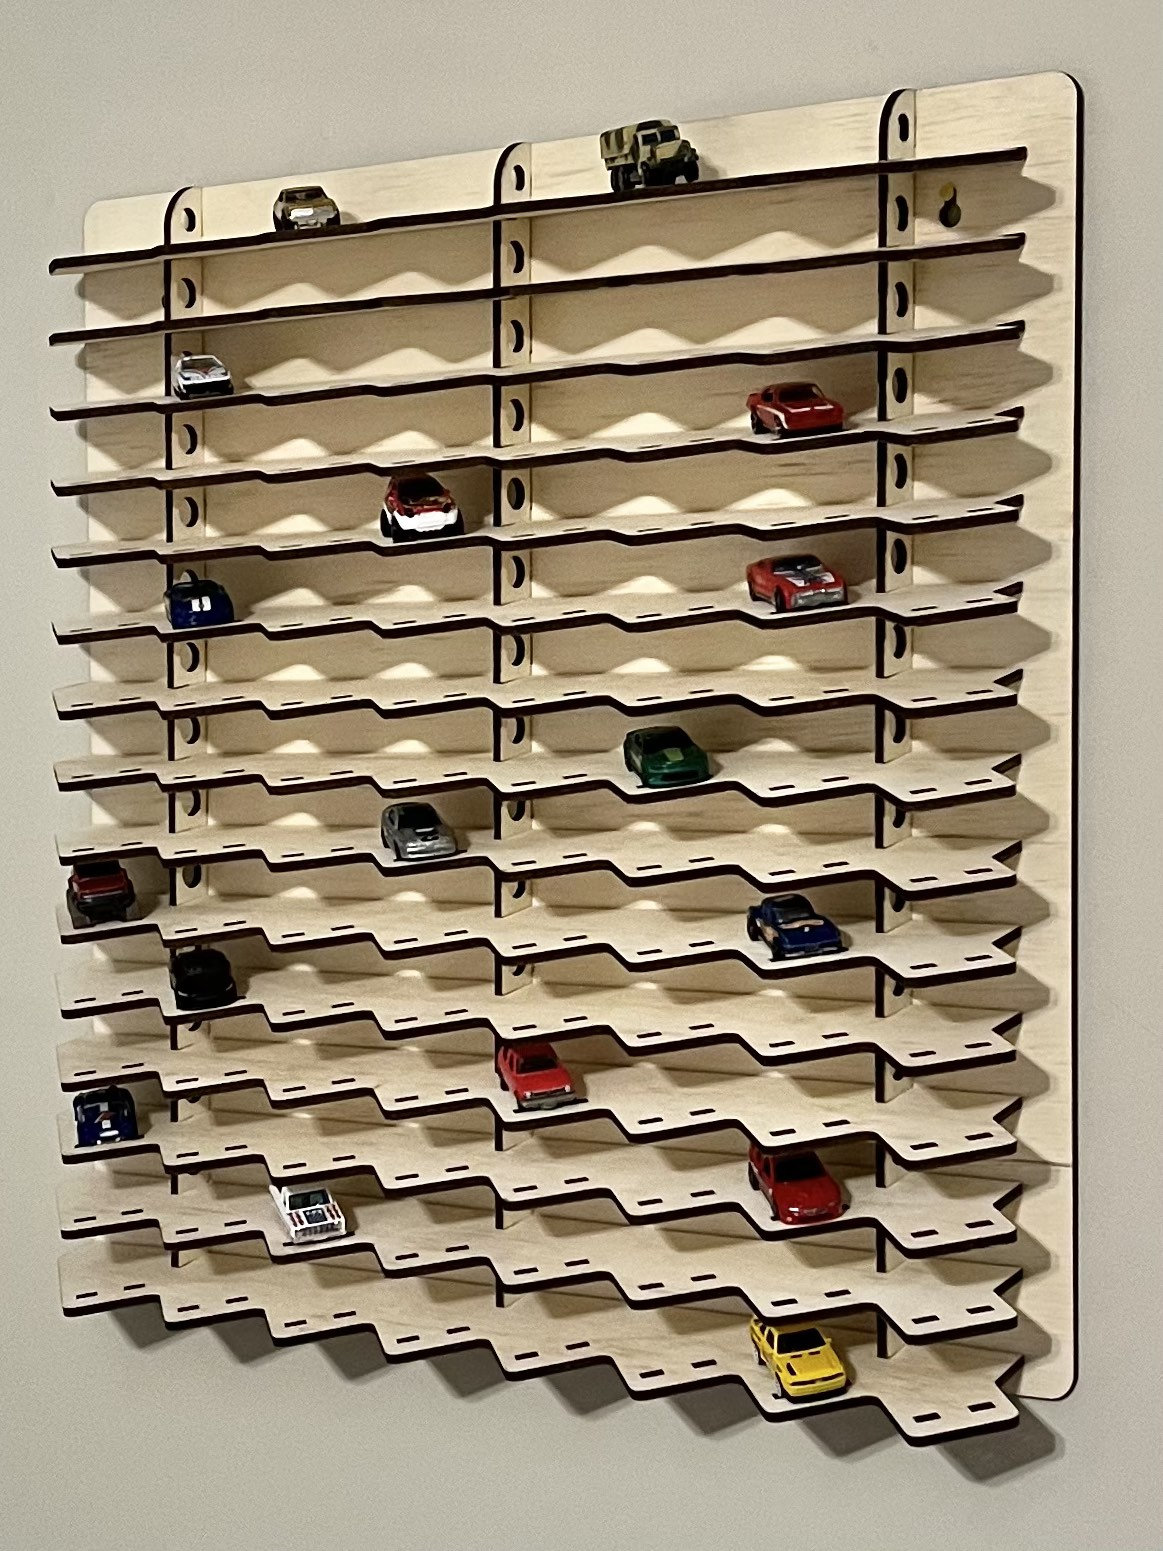 Display Shelf for Hot Wheels and Toy Cars – 20””